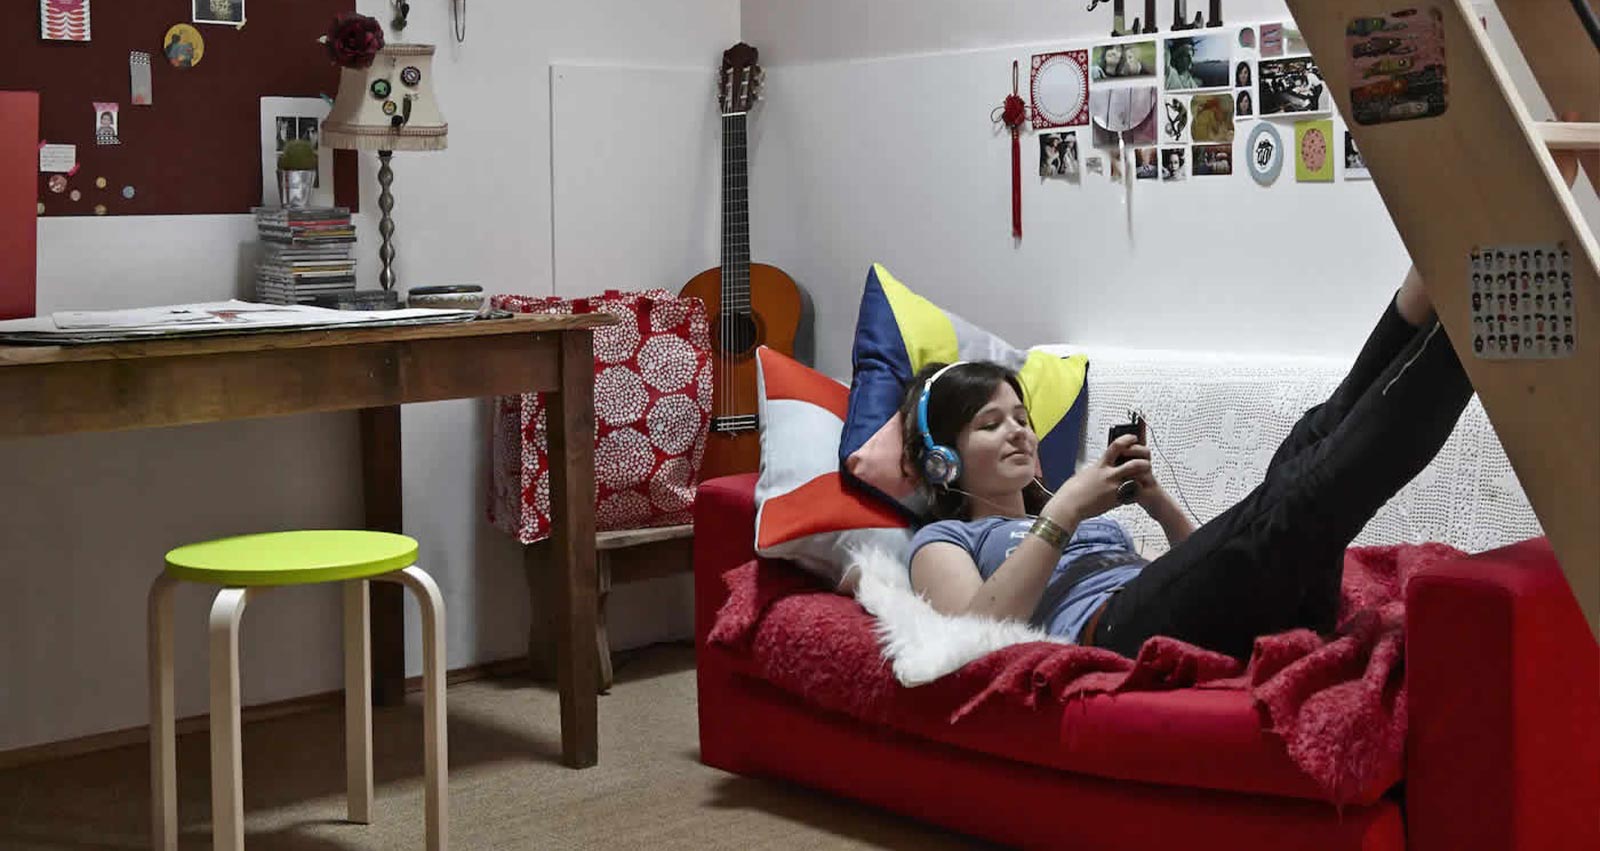 IKEA-Ideas to create a teen hang out space 01y